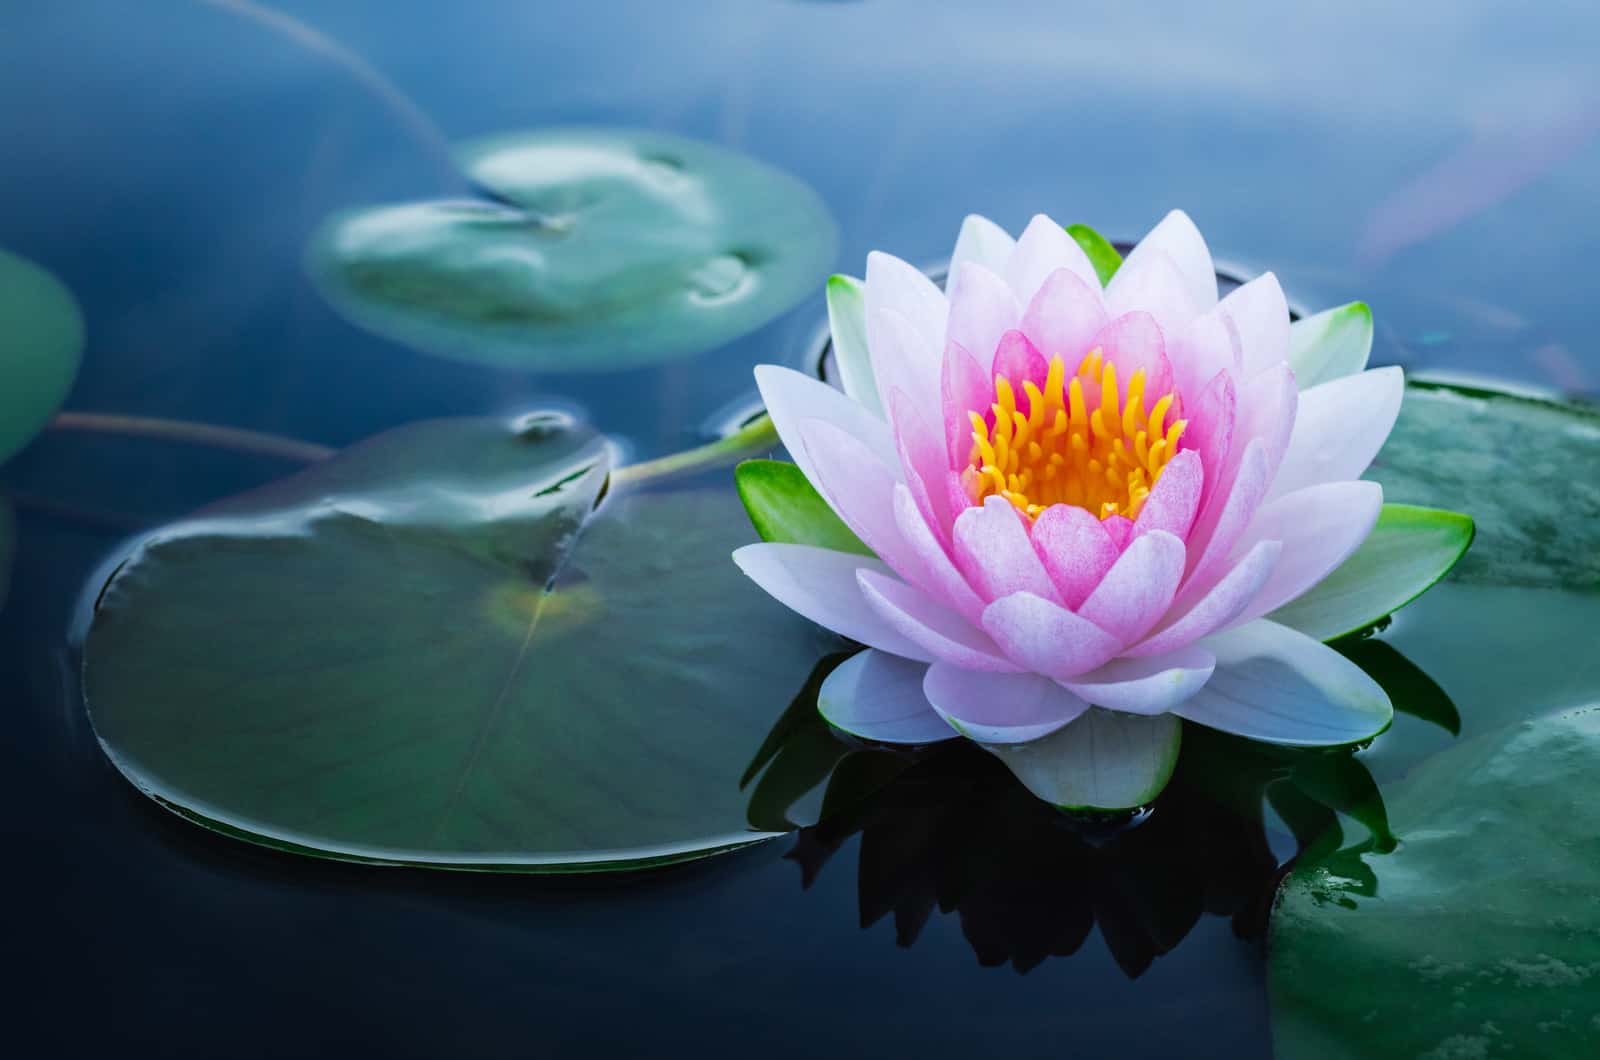 How To Grow Lotus Without Soil: 4 Helpful Tips